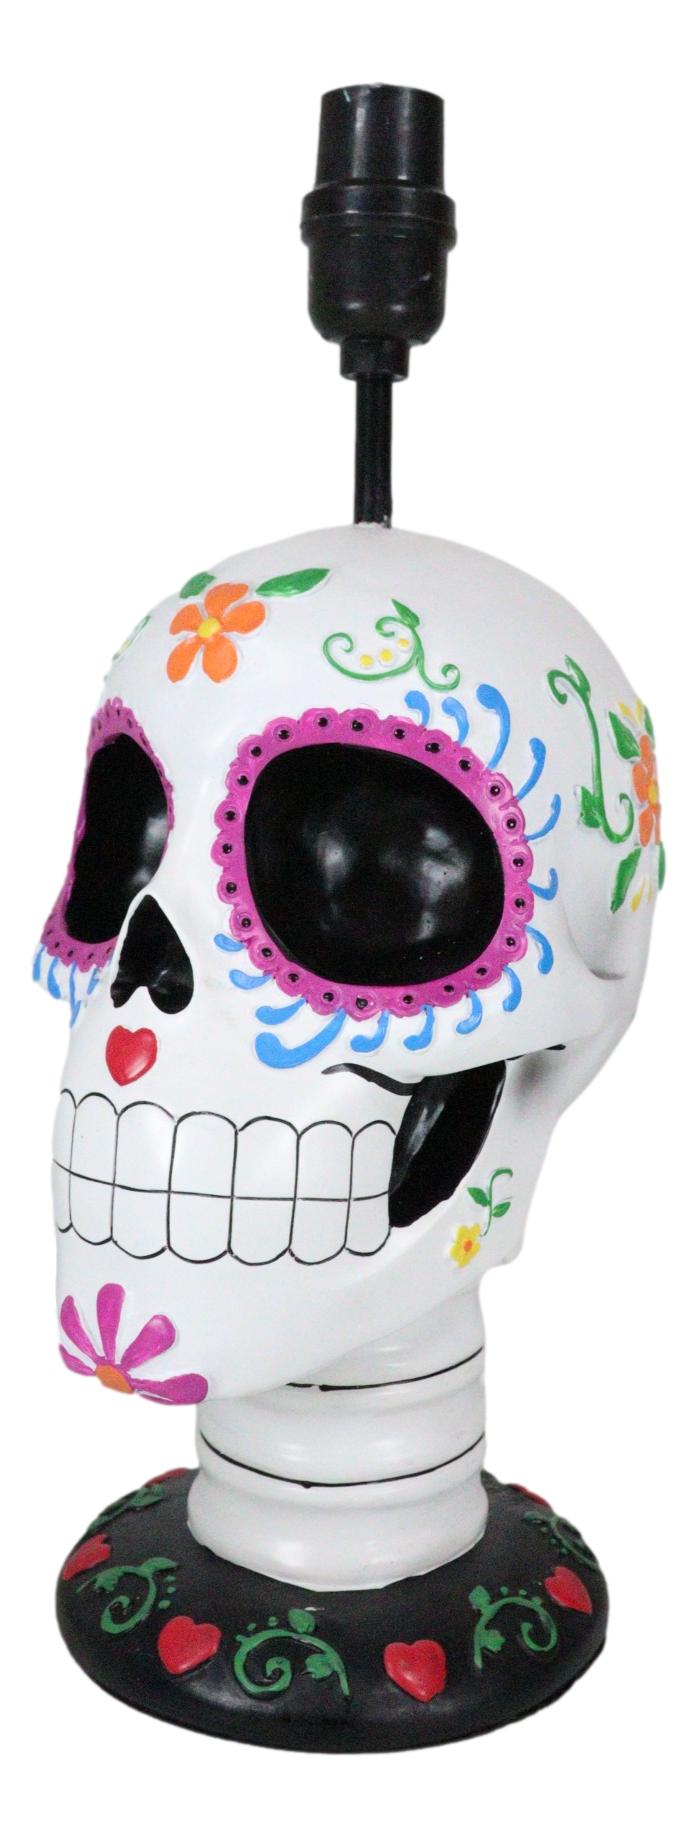 Festive Lights Macabre Day Of The Dead Sugar Skull Floral Sculptural Table Lamp